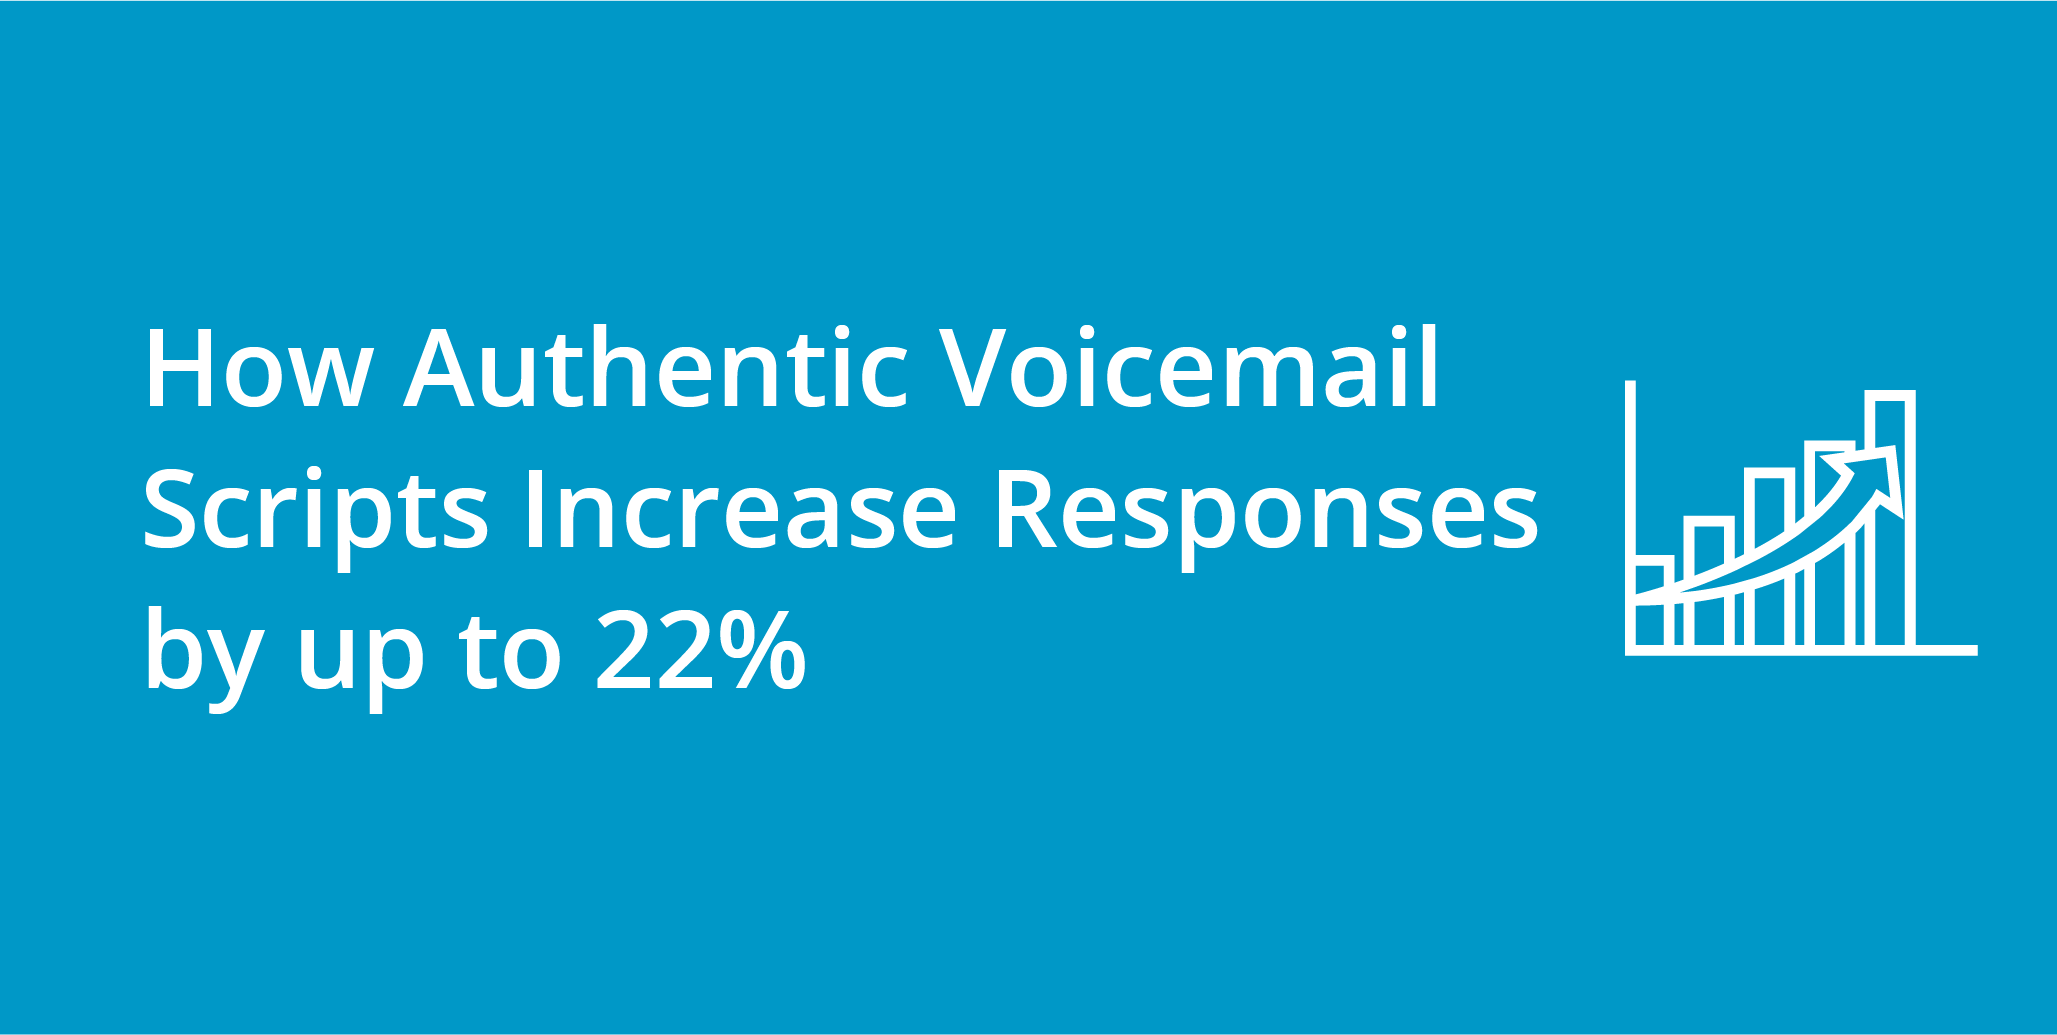 How Authentic Voicemail Scripts Increase Responses by up to 22% | Telephones for business